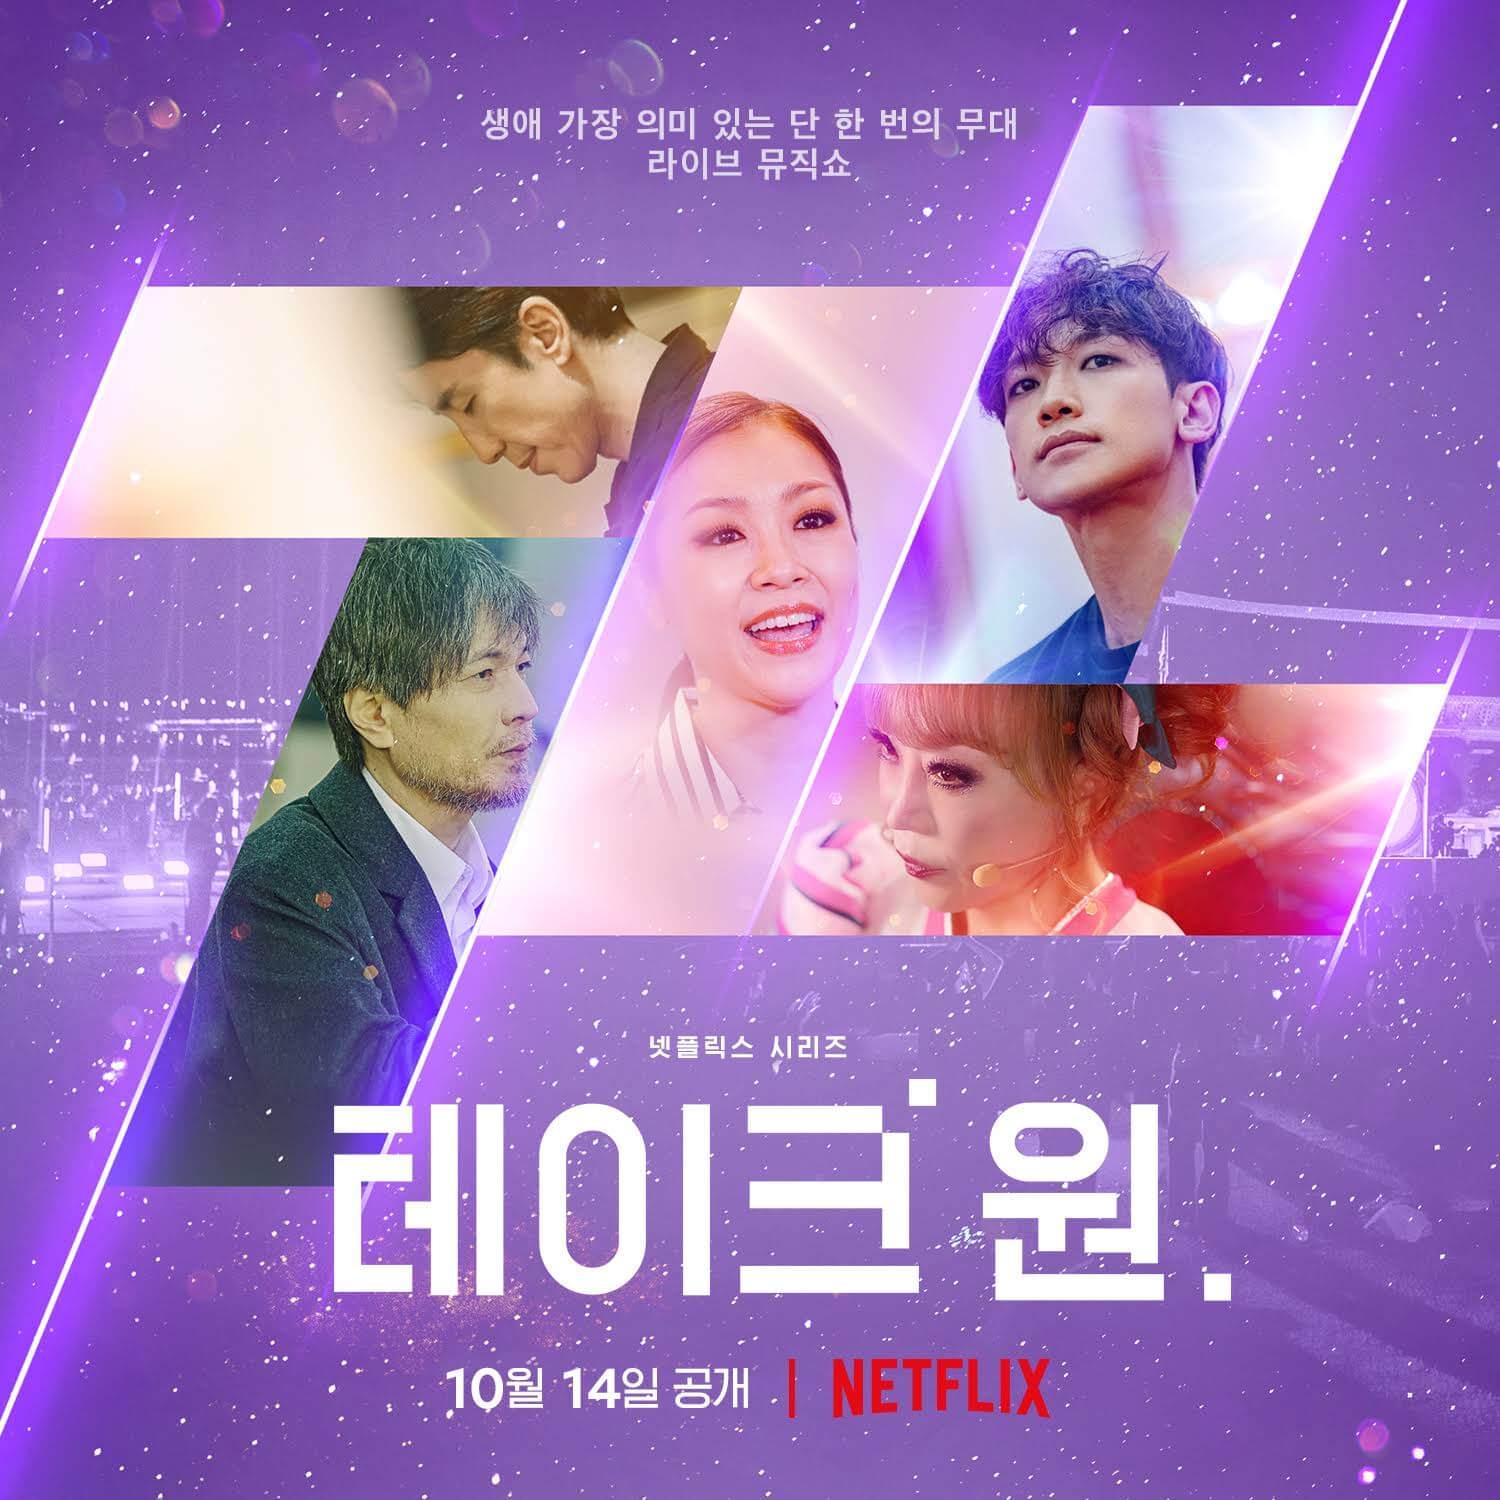 korean music variety show take 1 coming to netflix in october 2022 poster 1